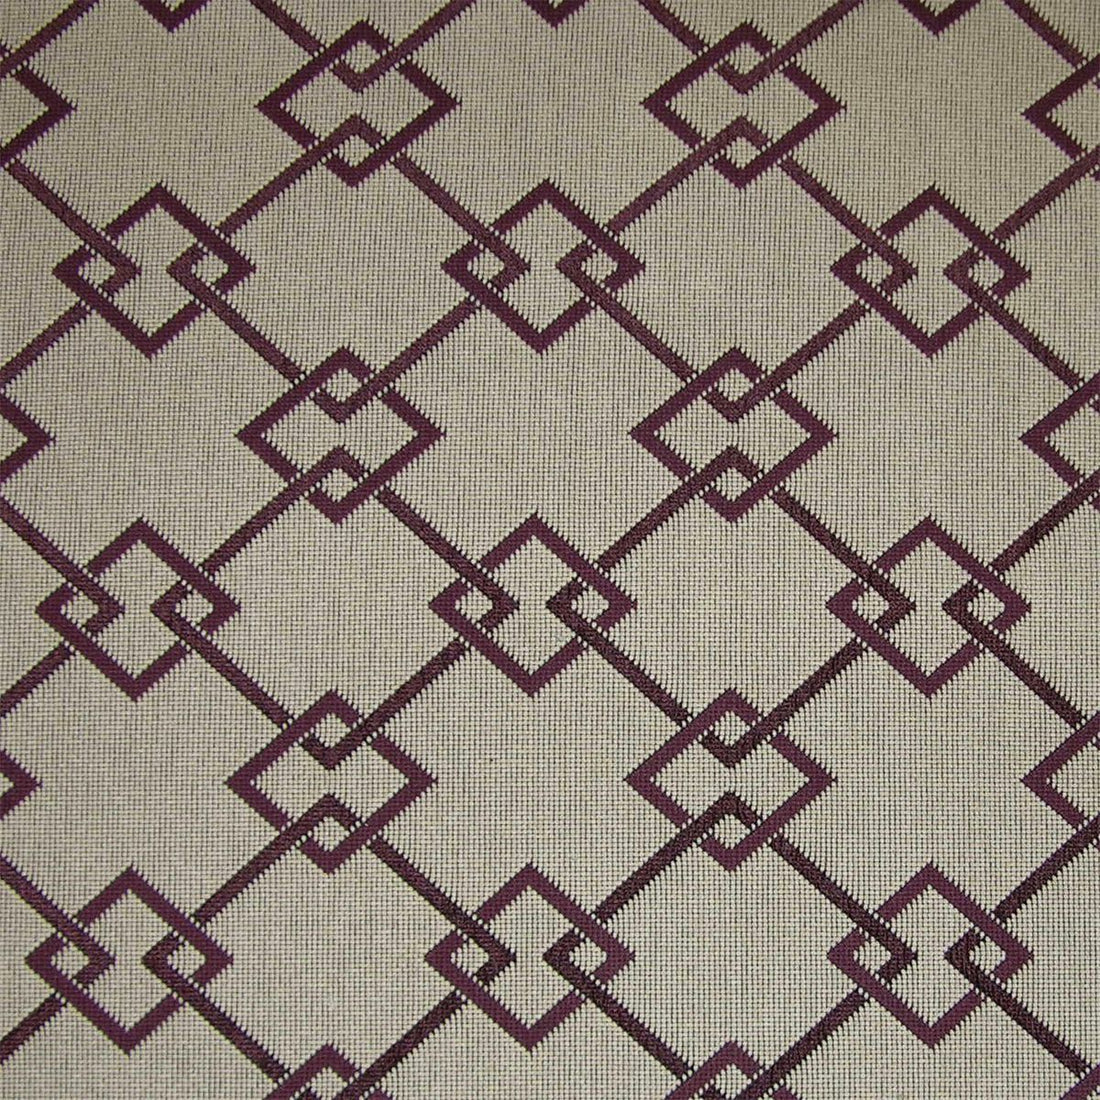 Diamonds fabric in plum color - pattern number M8 00039408 - by Scalamandre in the Old World Weavers collection